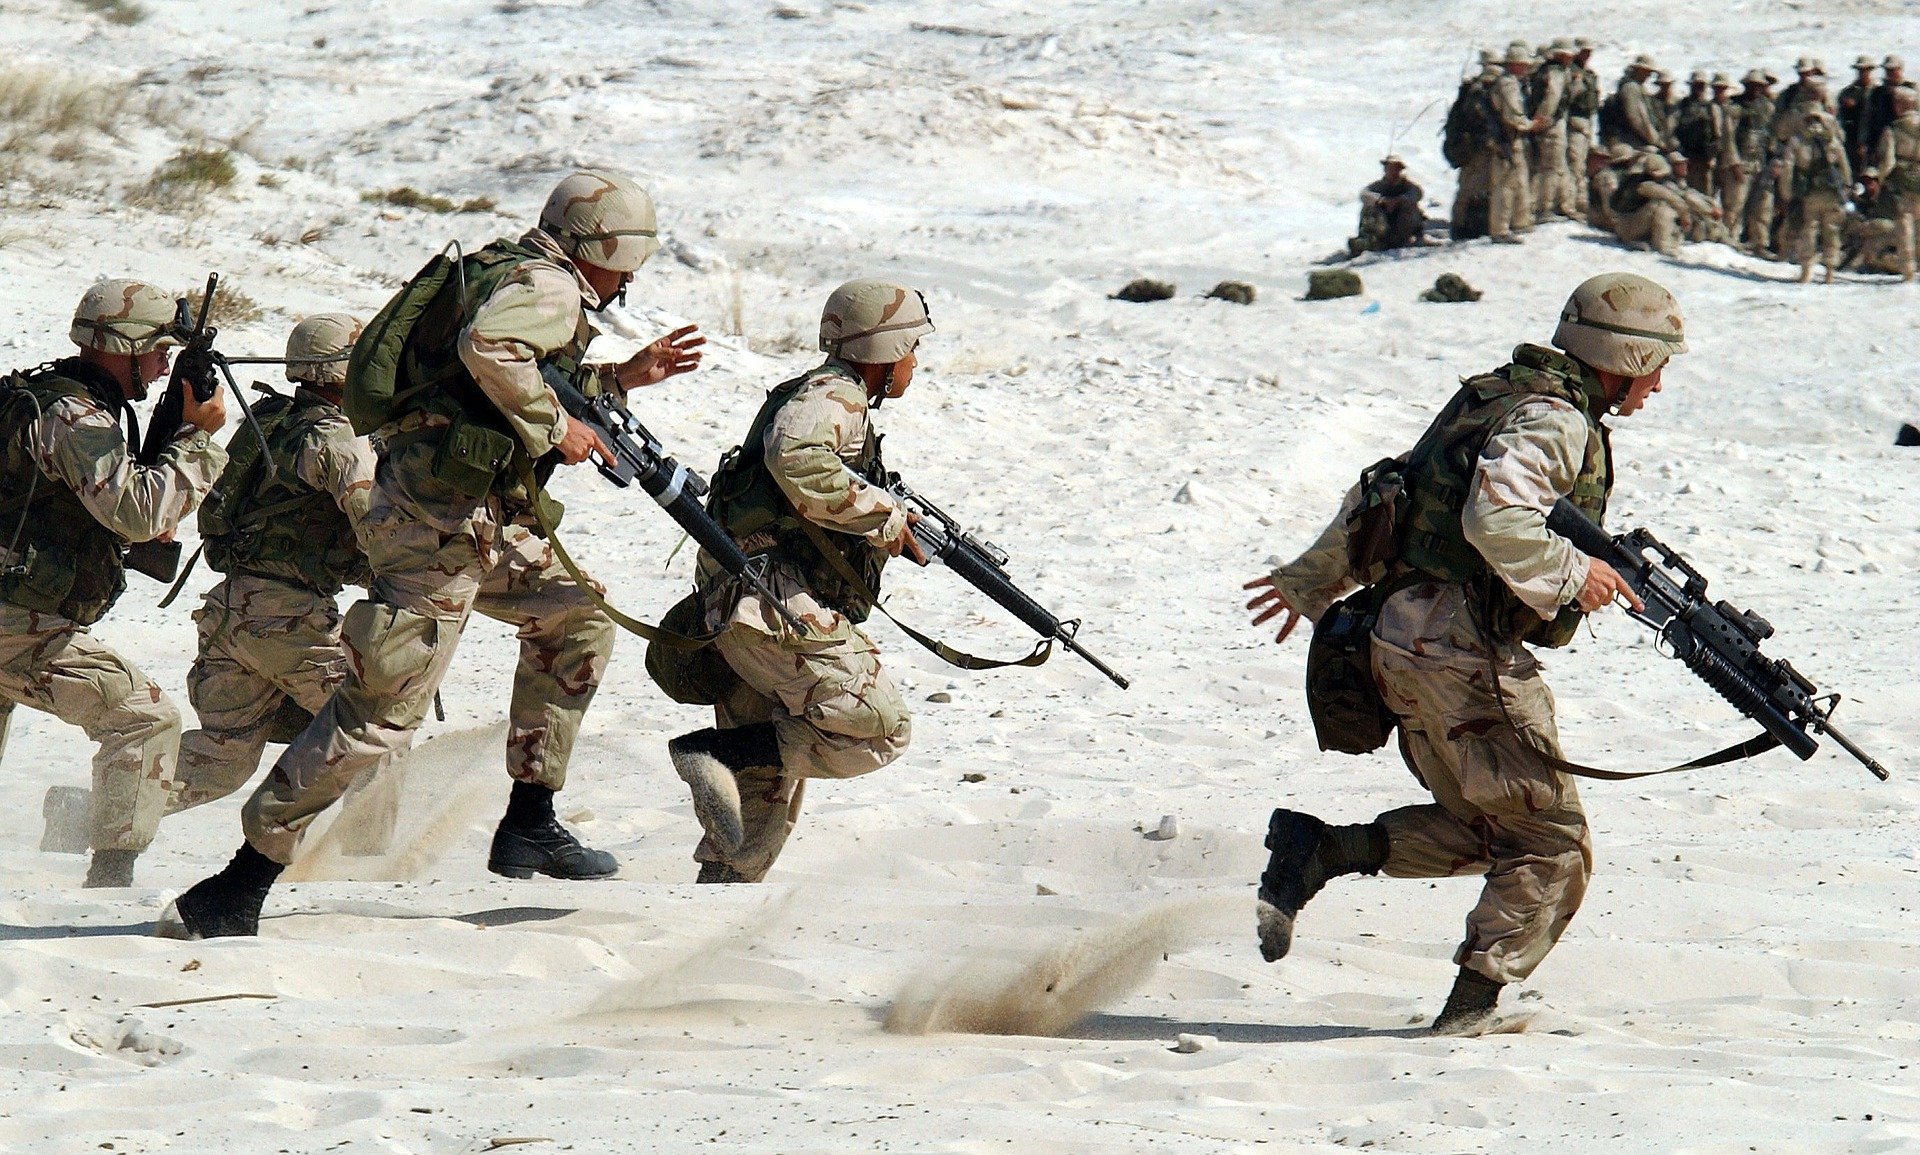 Soldiers in combat on the battlefield